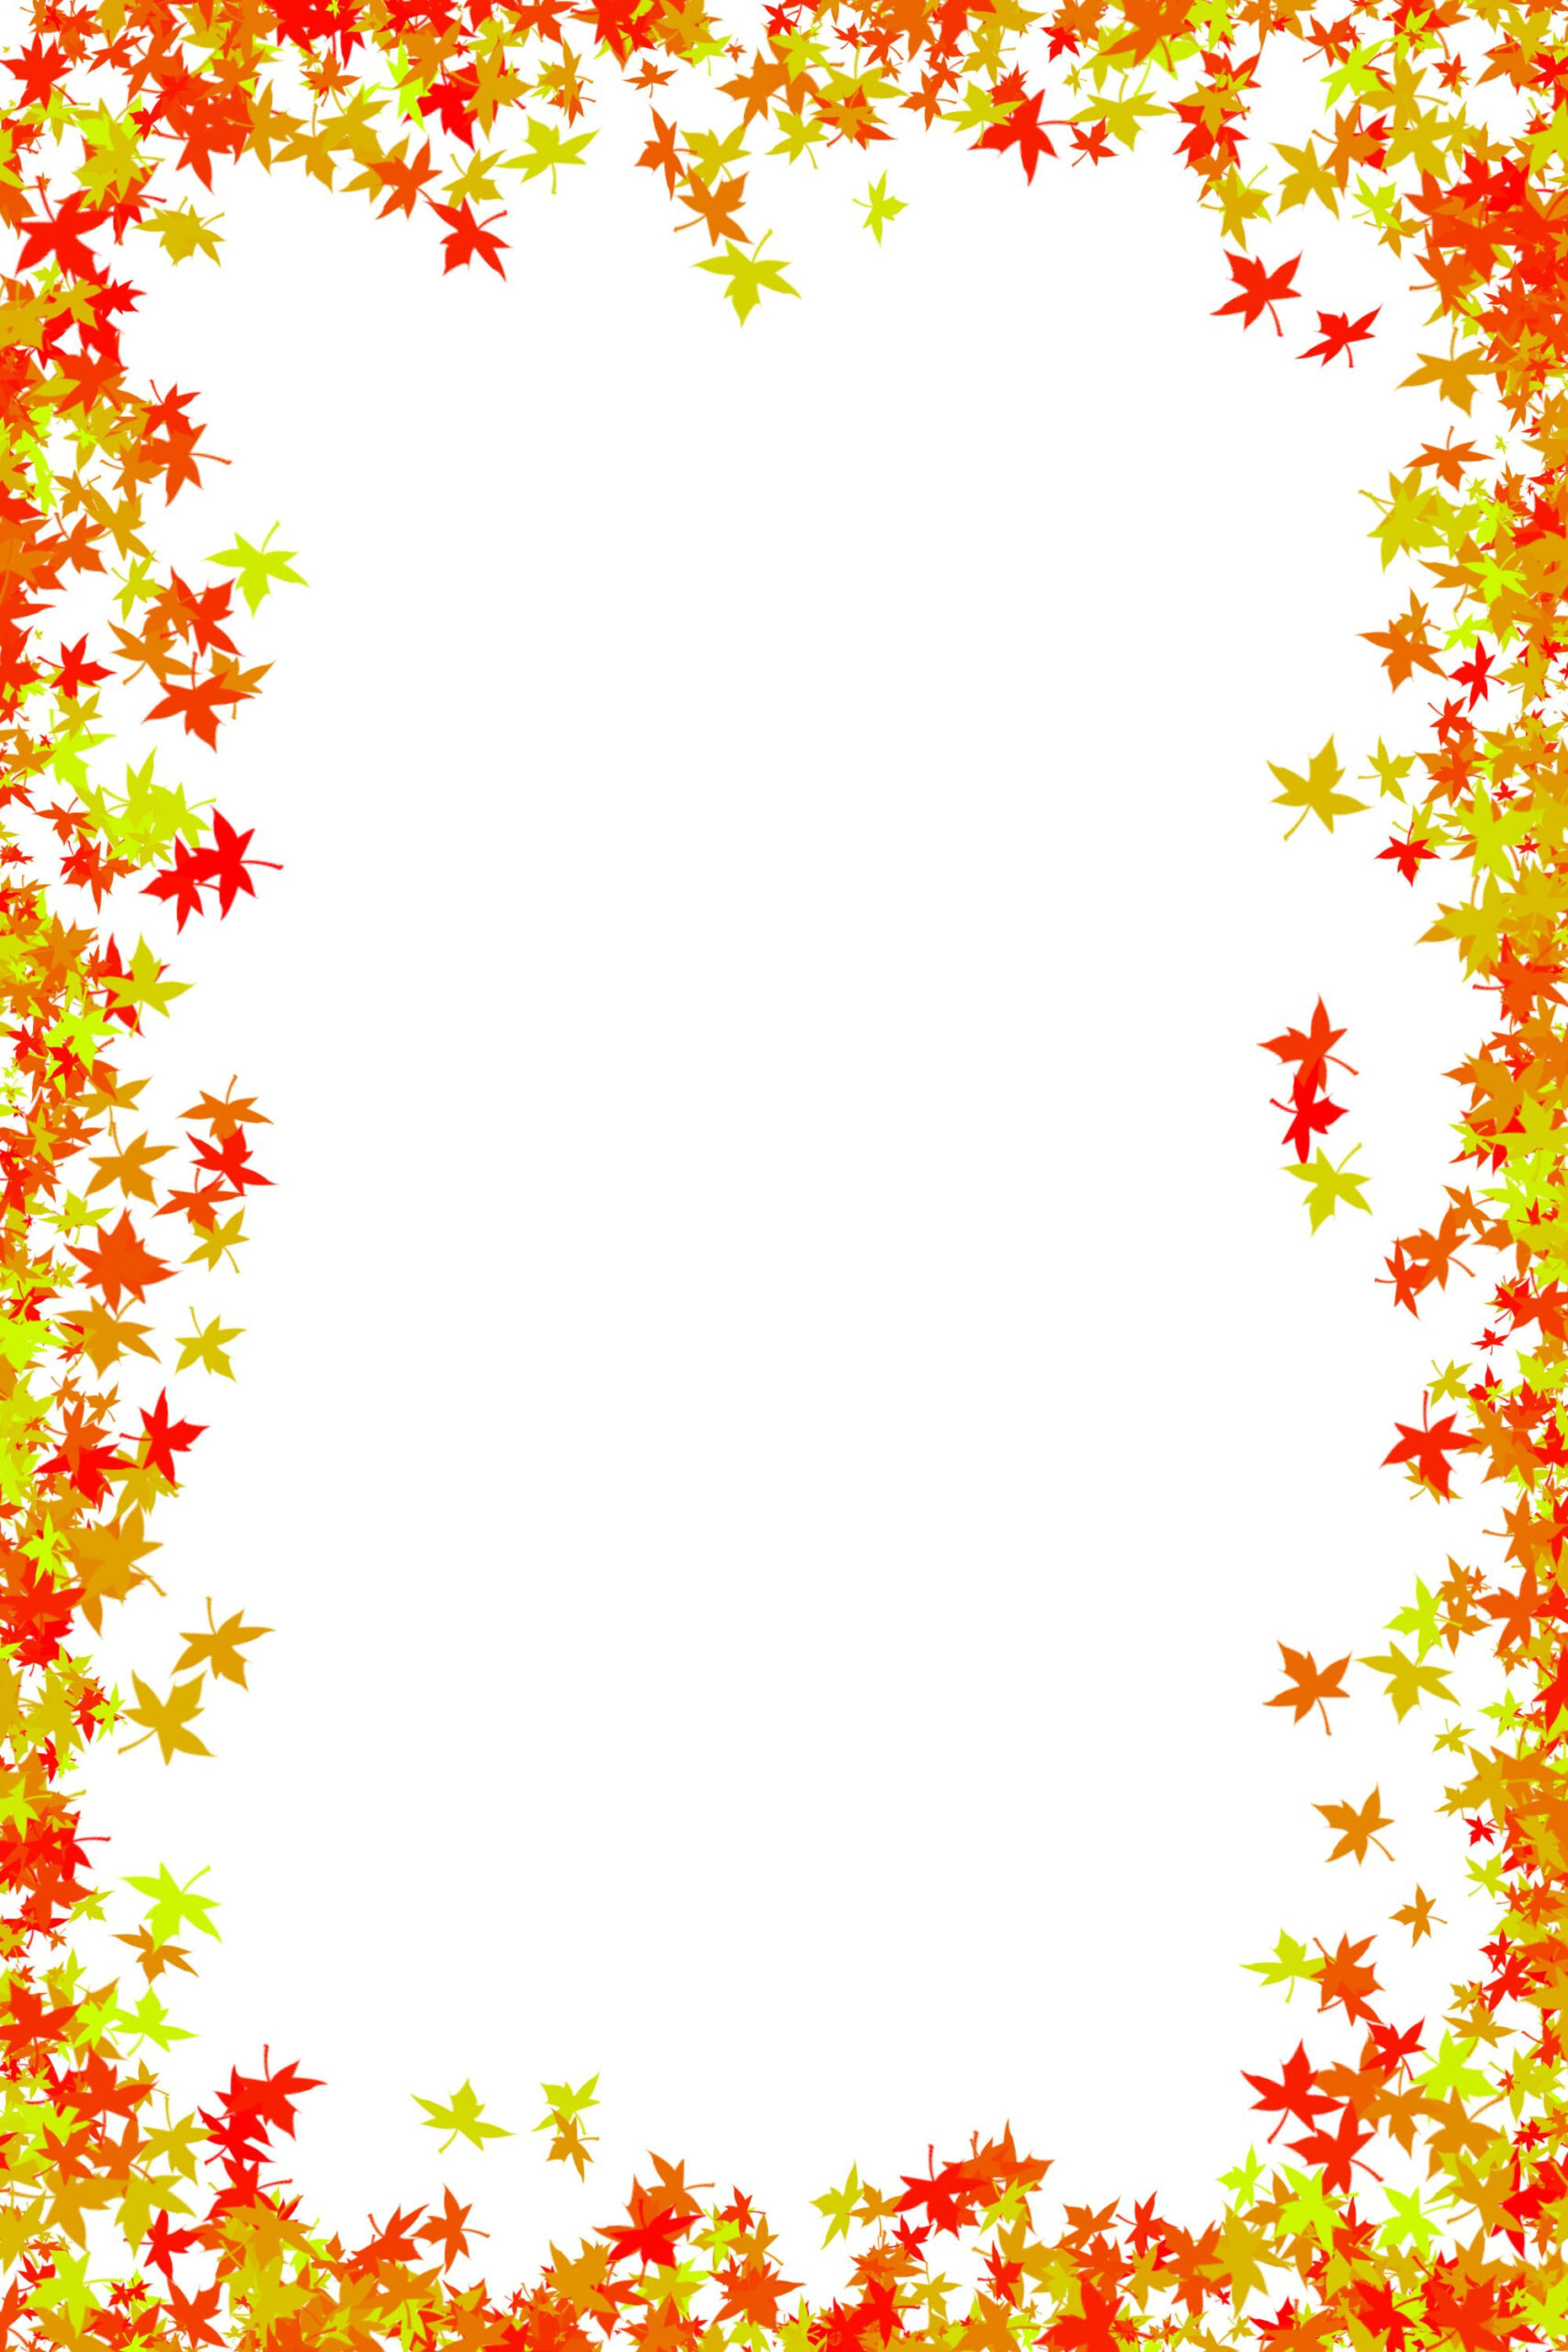 Fall Foliage Border Free Download Photo Frame Of Maple Leaves In Red 